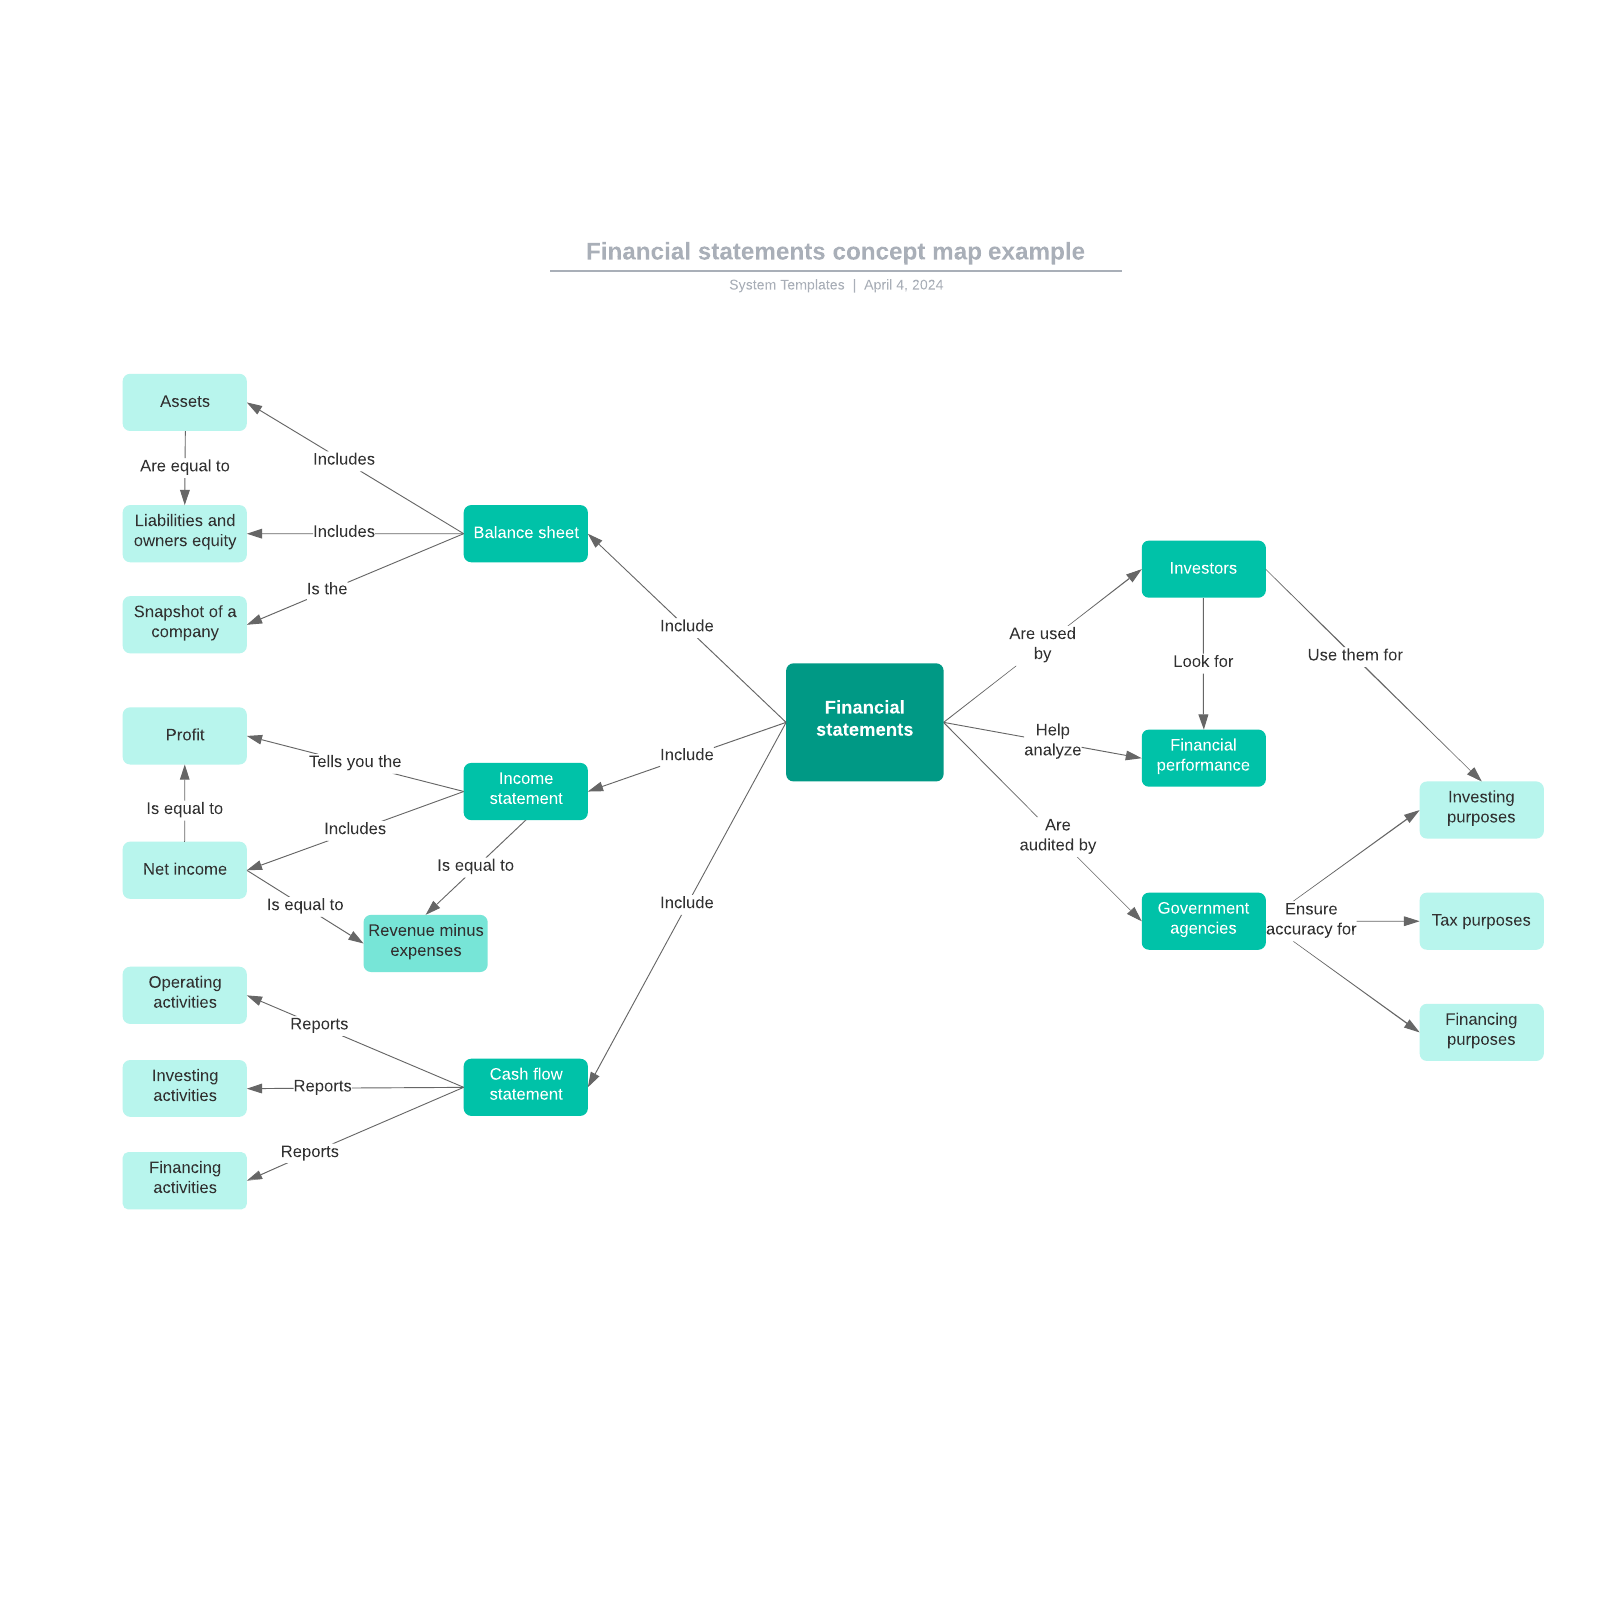 Financial statements concept map example example